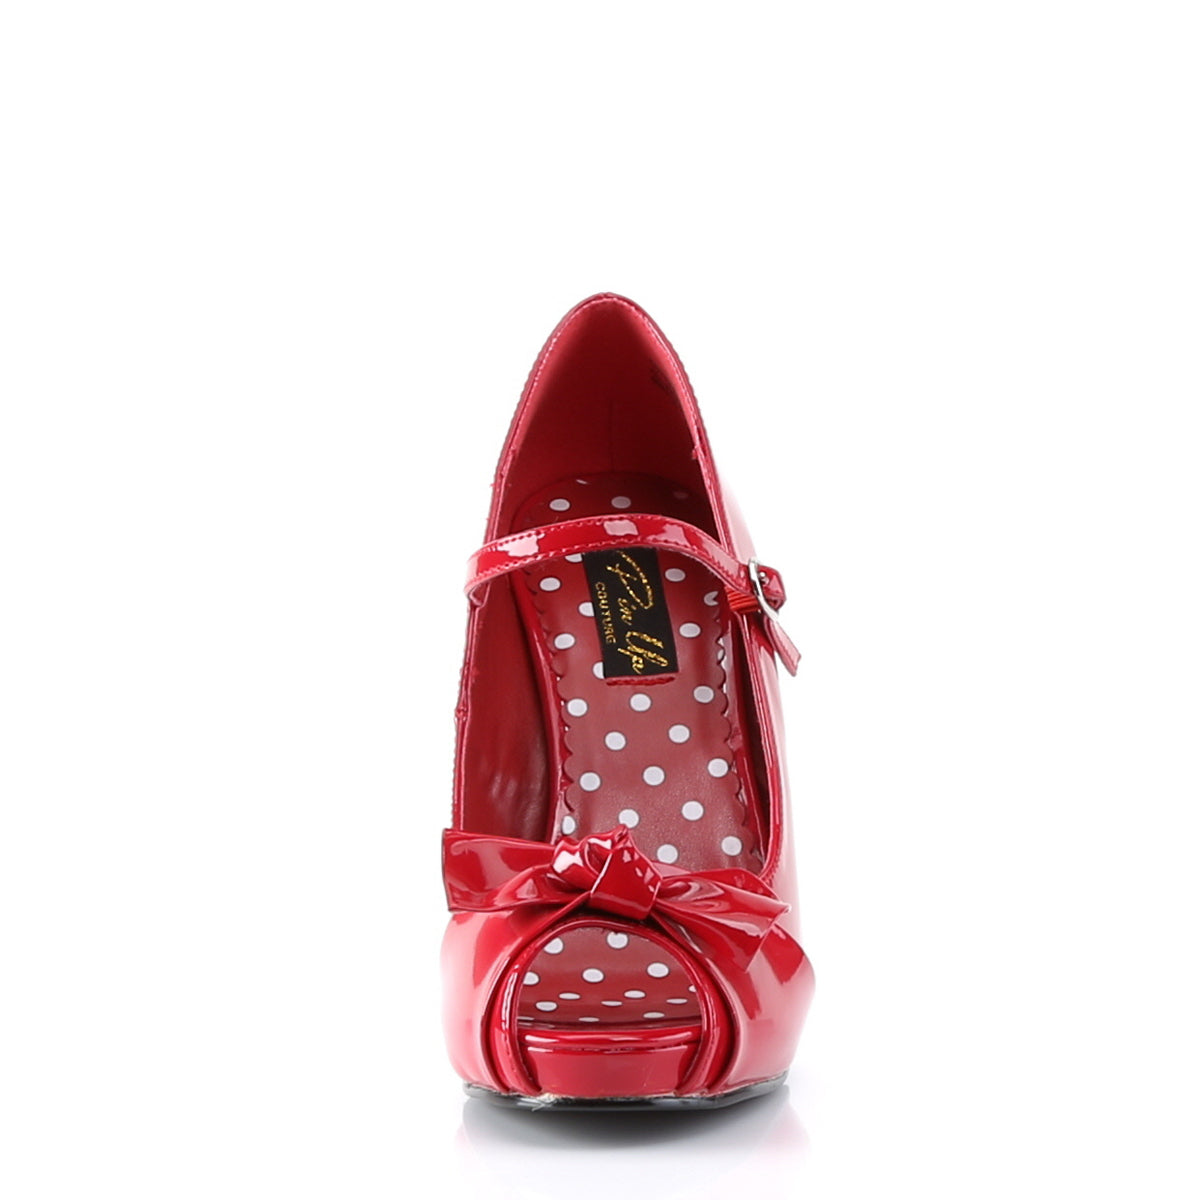 CUTIEPIE-08 Pin Up Couture Red Patent Platforms [Retro Glamour Shoes]